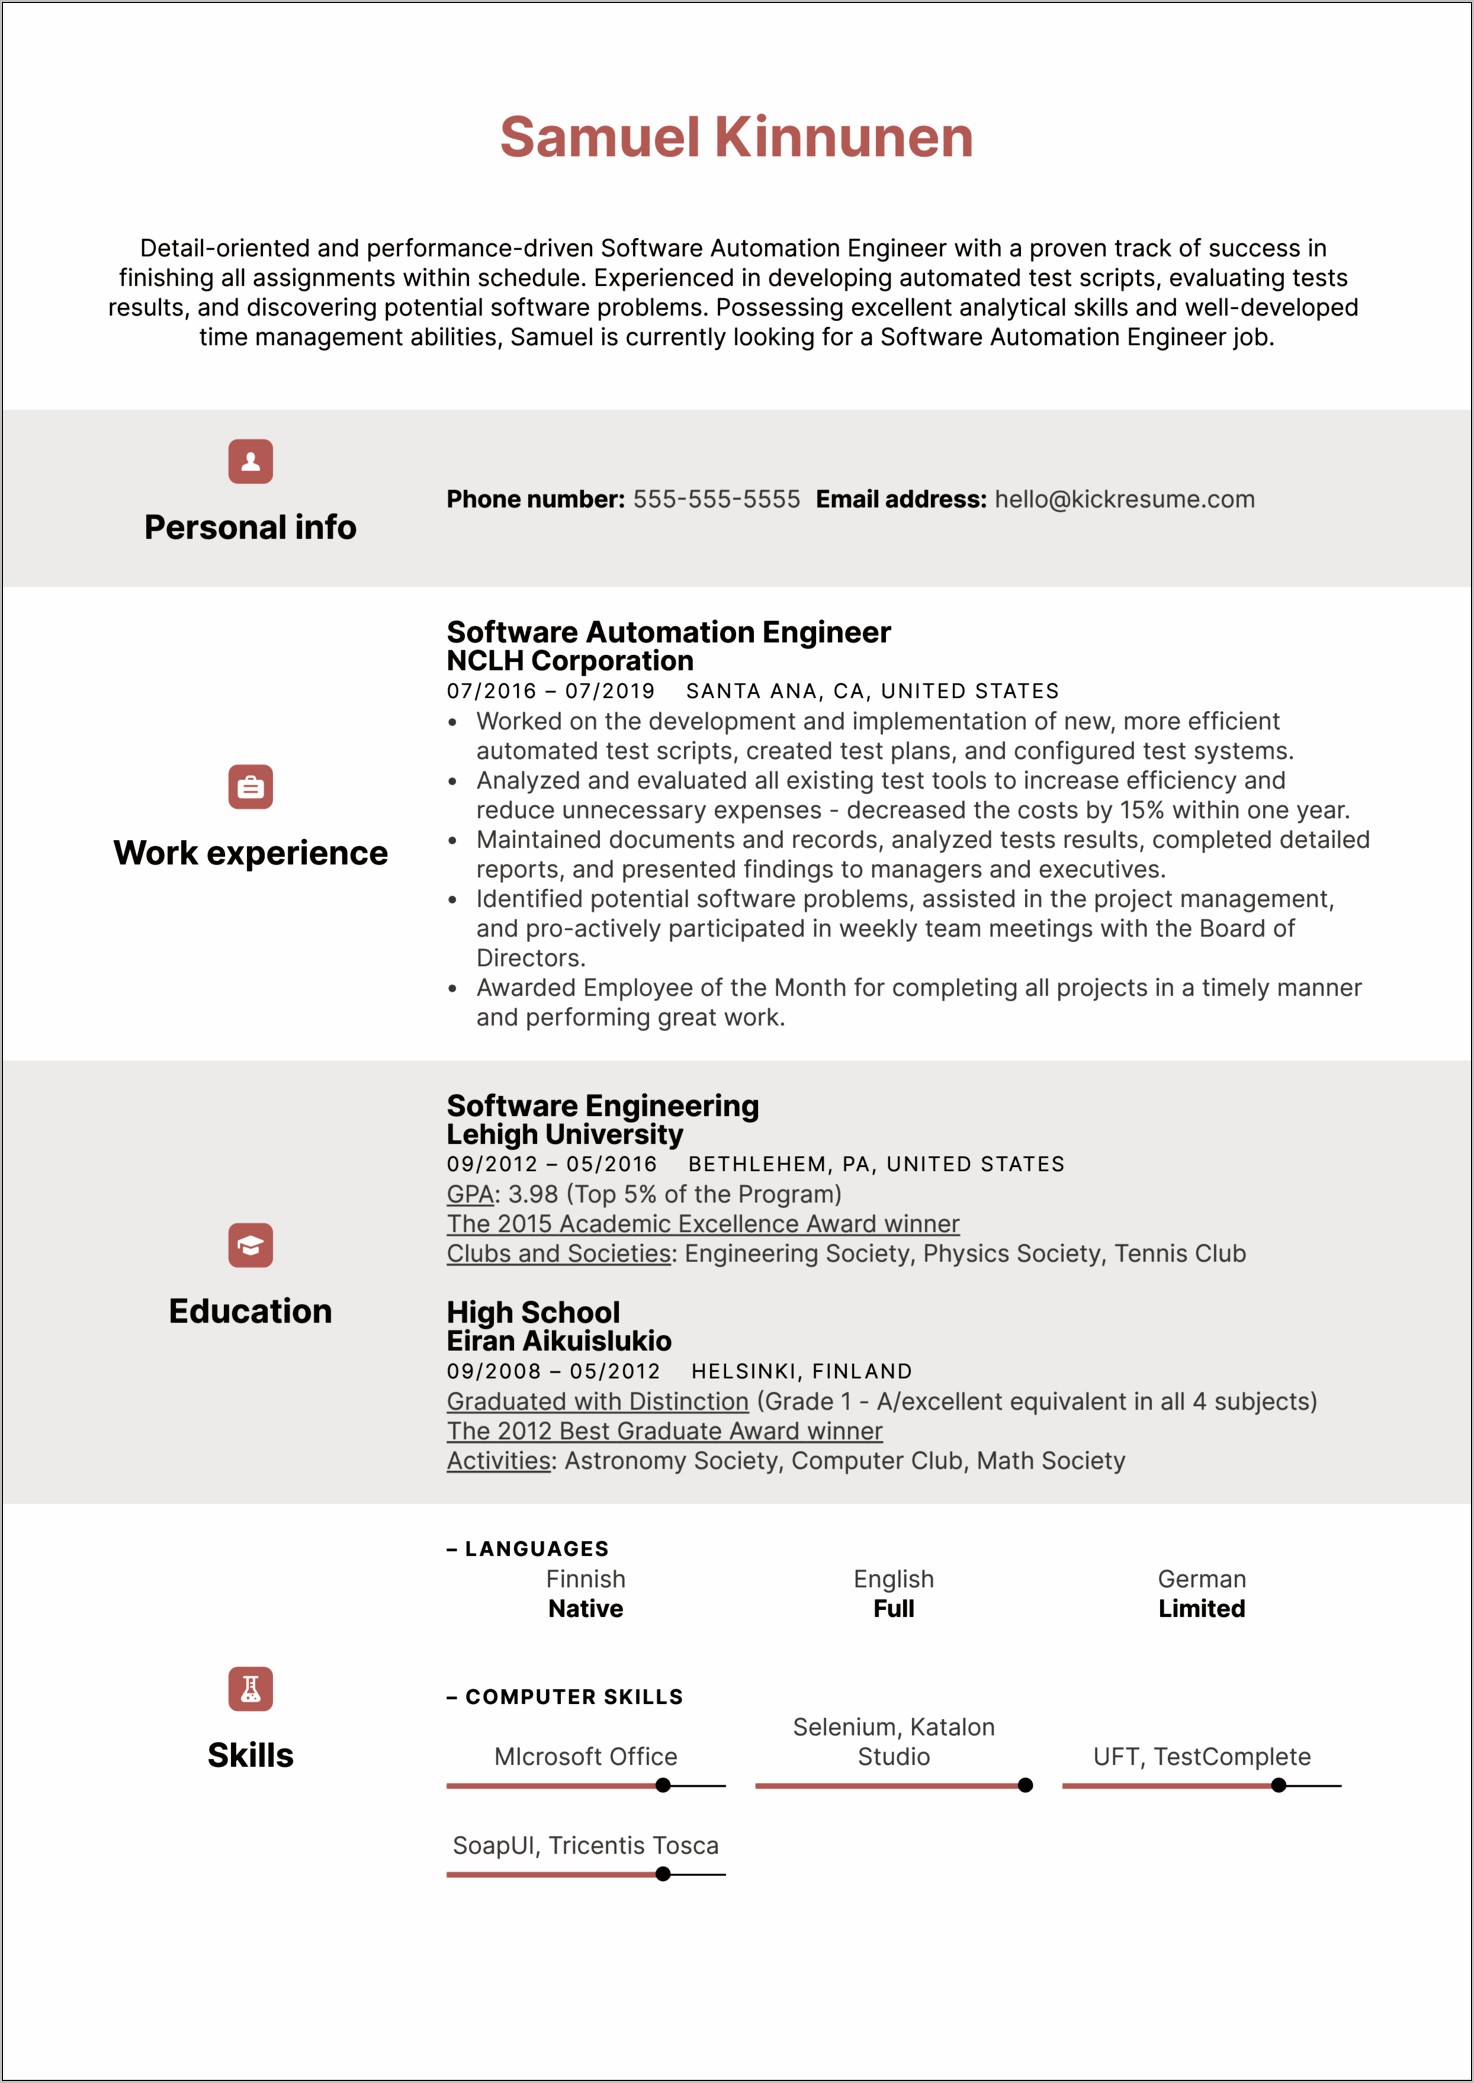 Sample Resume With Software Skills